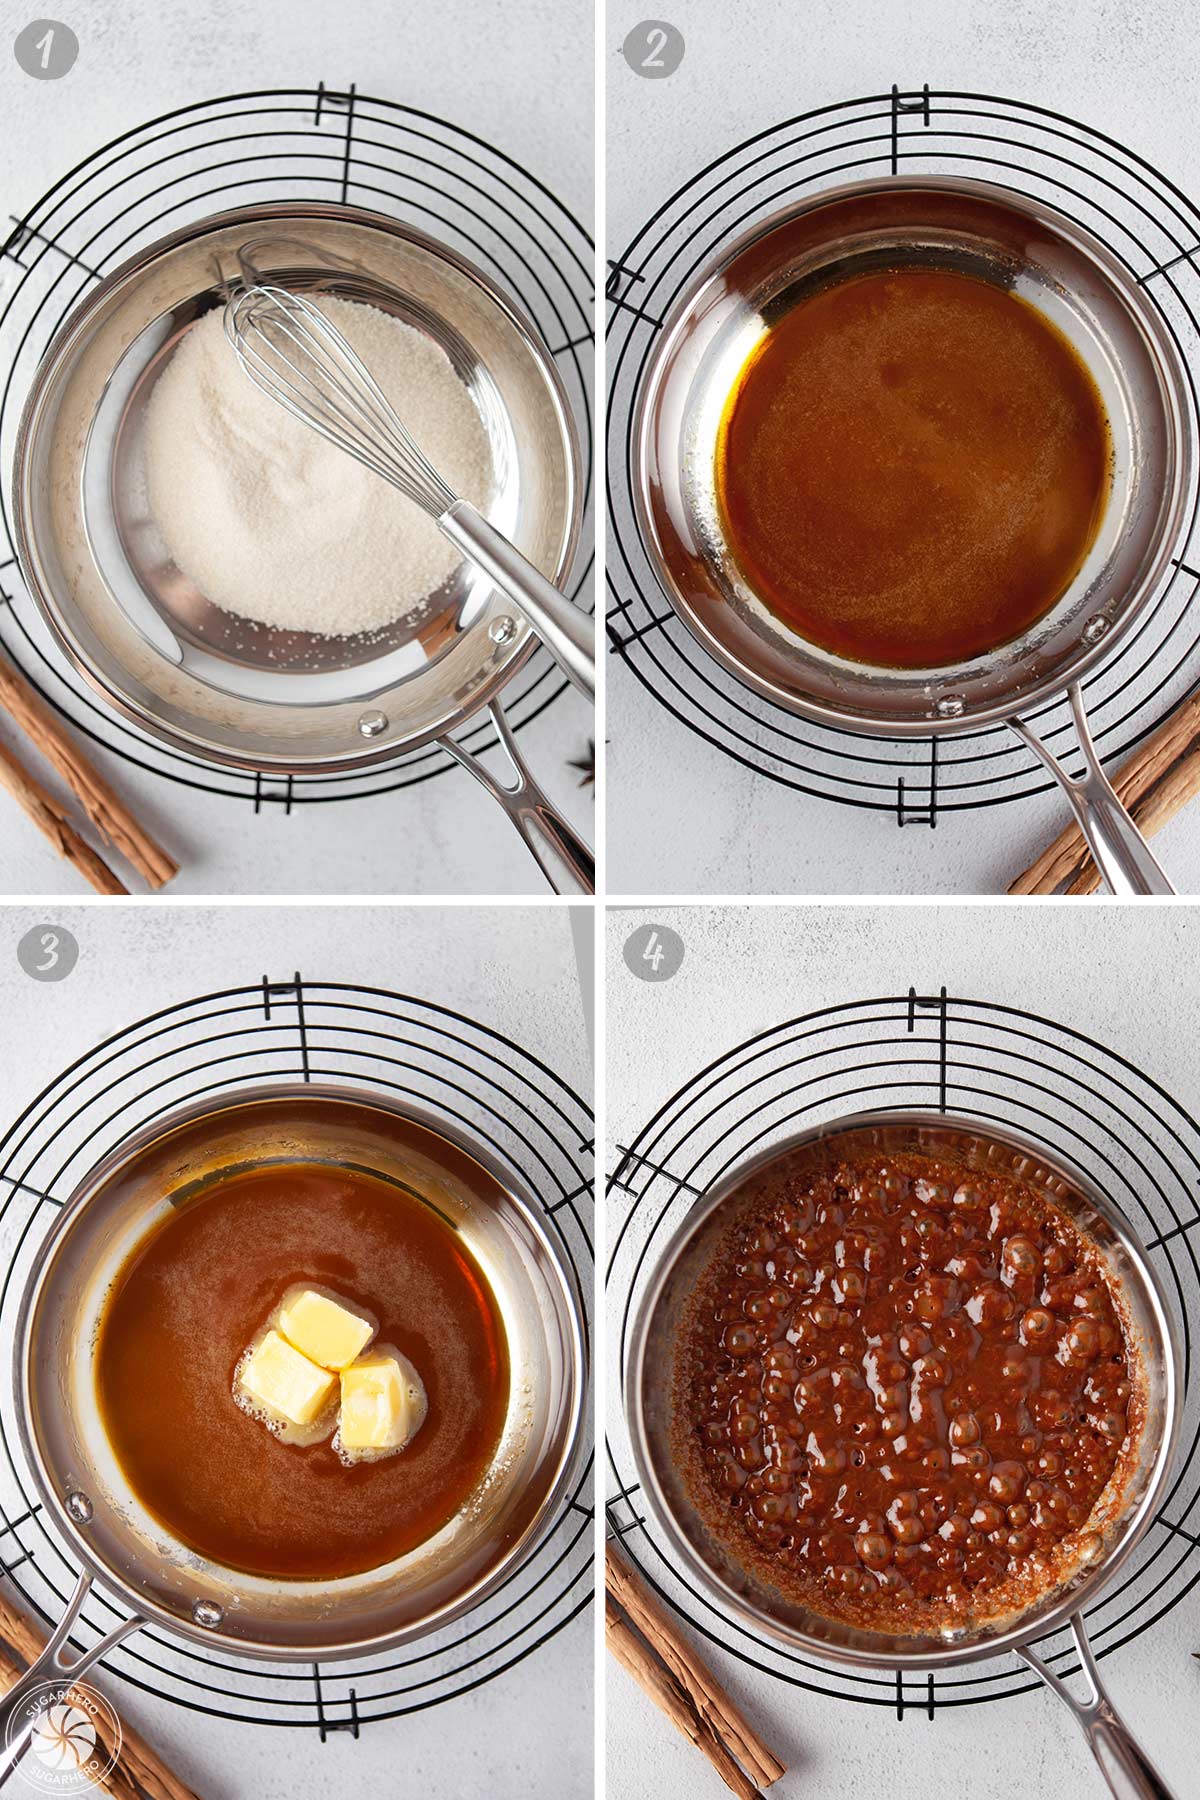 4 photo collage of how to make the sauce for Poached Pears including mixing sugar and butter to make caramel.